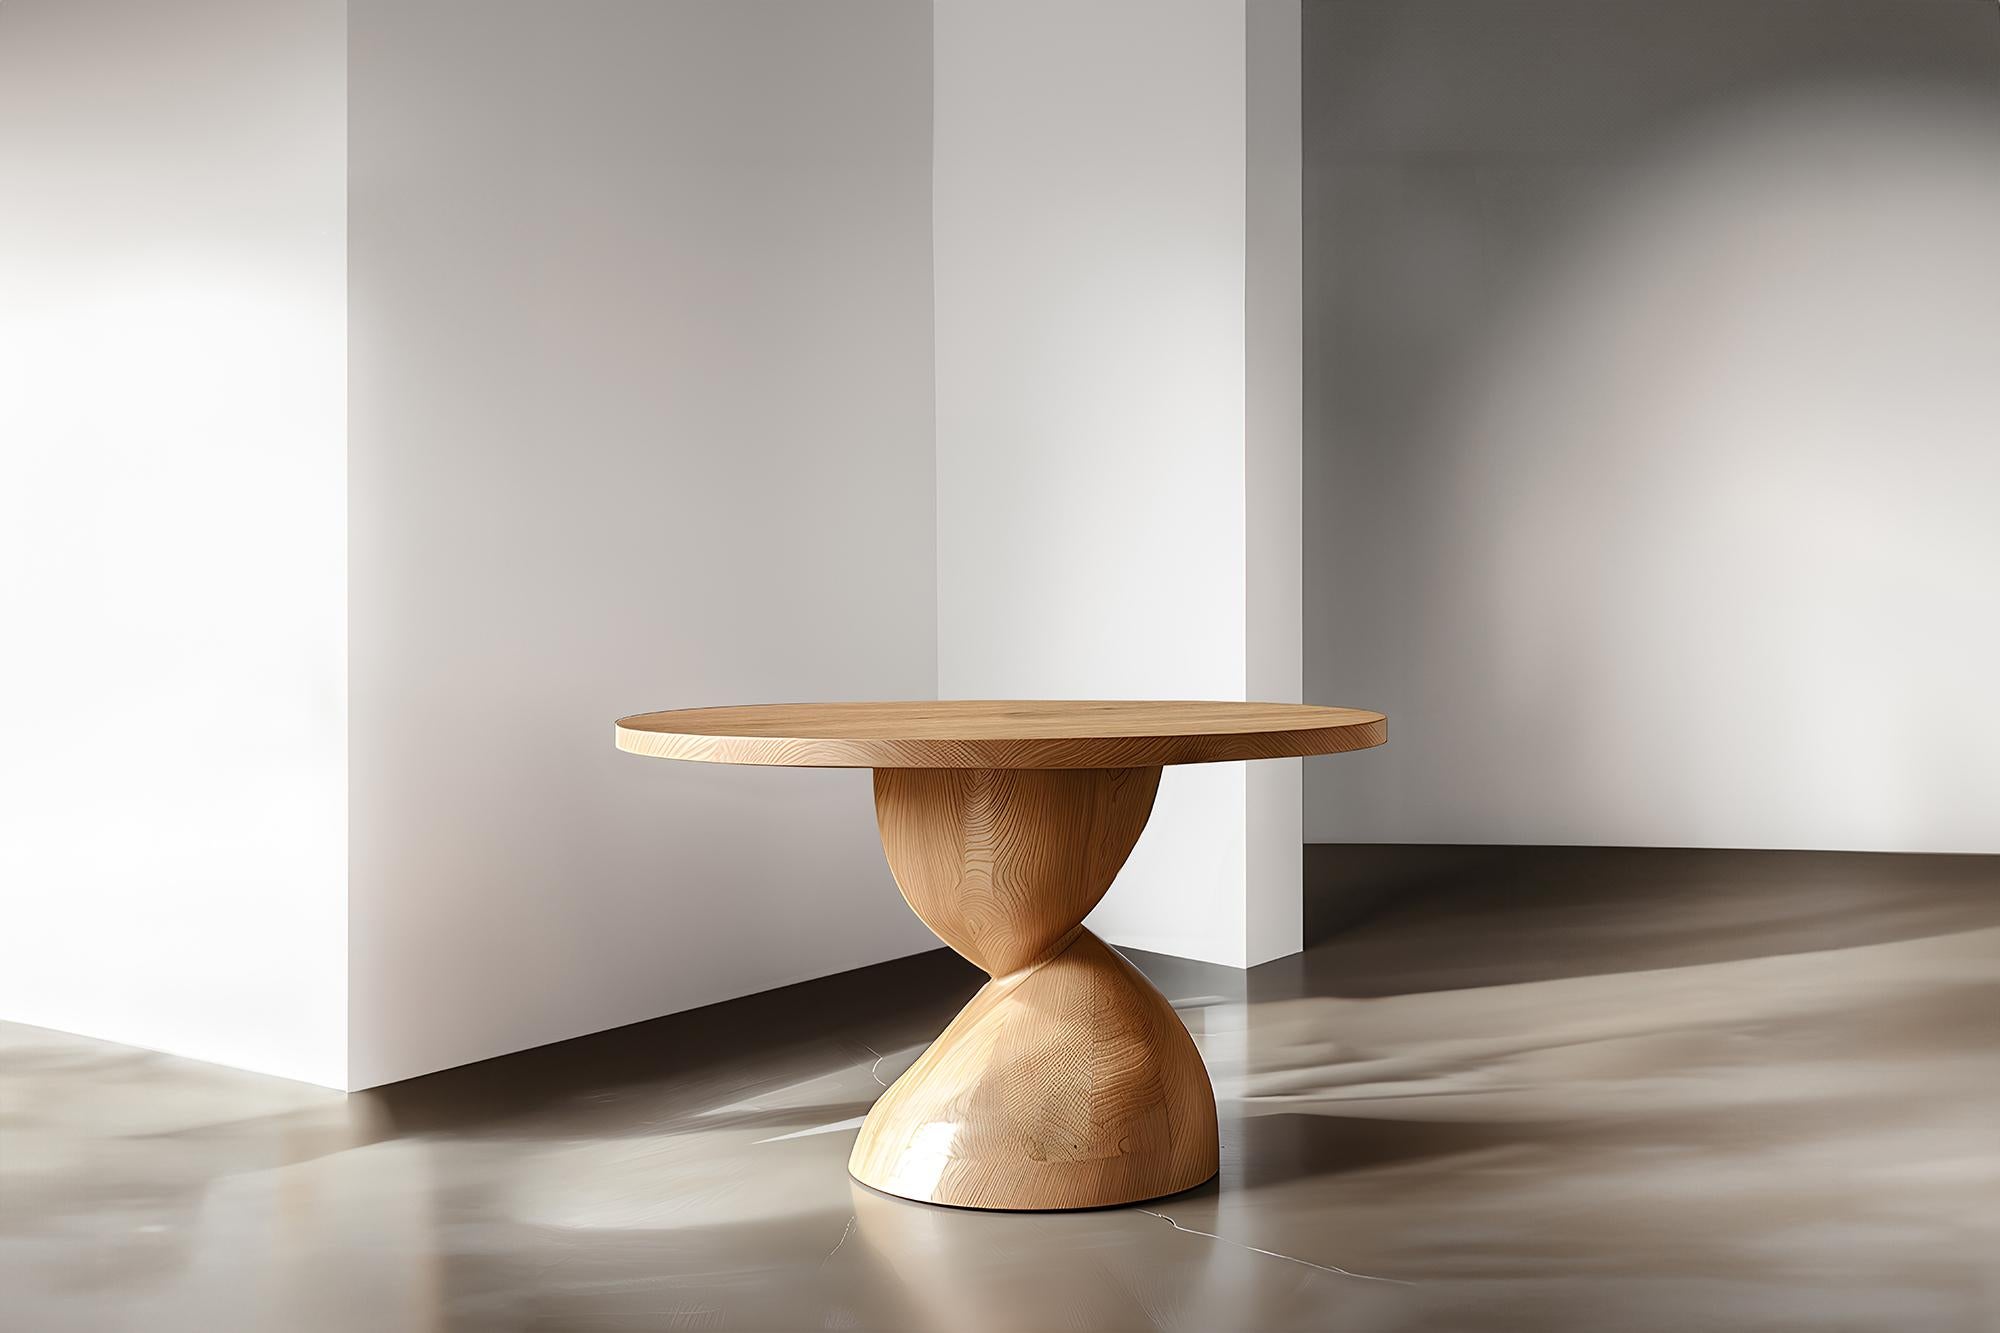 Dining Tables, Socle's Solid Wood No18, Mealtime Masterpieces by NONO

——

Introducing the 